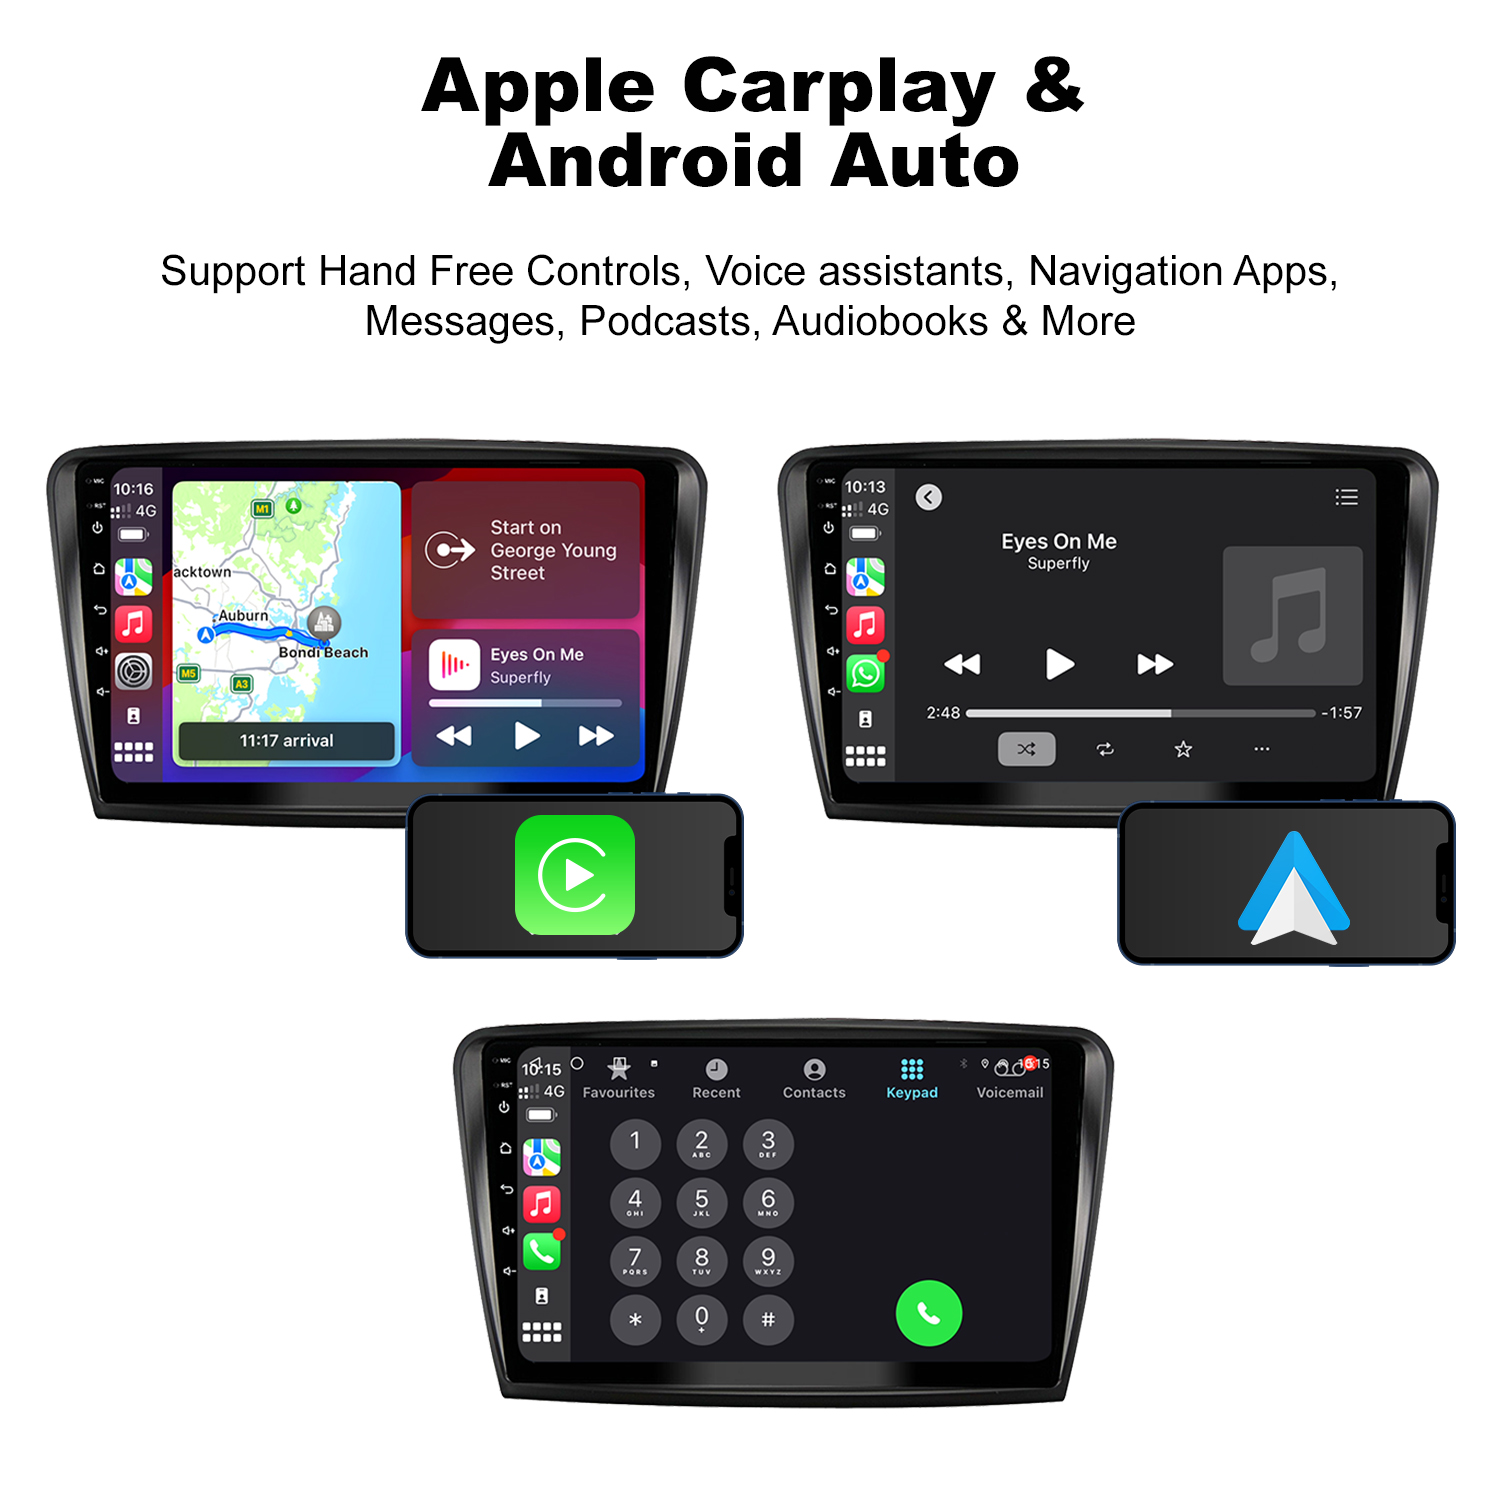 A photo highlights the feature of this upgrade kit. A message, "Support hands-free controls, voice assistants, navigation apps, messages, podcasts, audiobooks, & more," is placed under the title "Apple CarPlay & Android Auto."